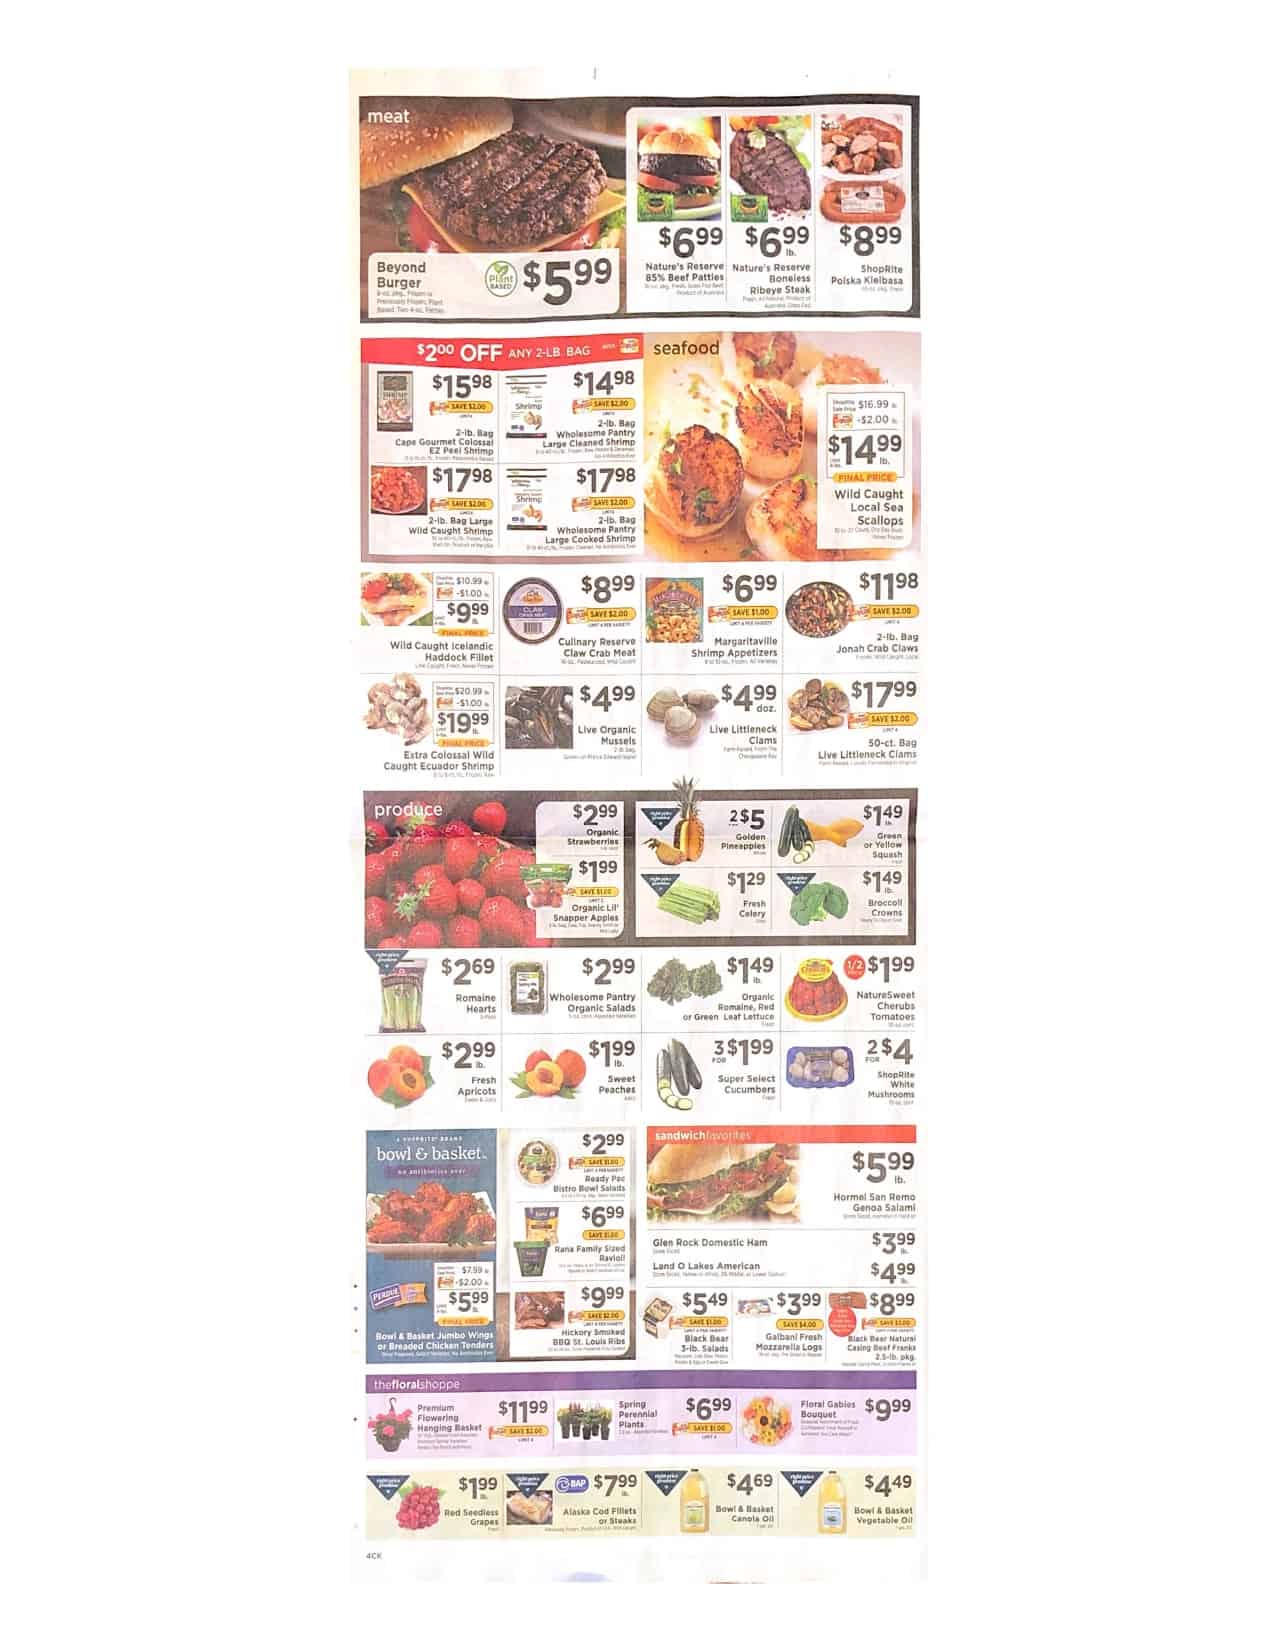 ShopRite Ad Scan For 05/24/20 Thru 05/30/20 Is Here!